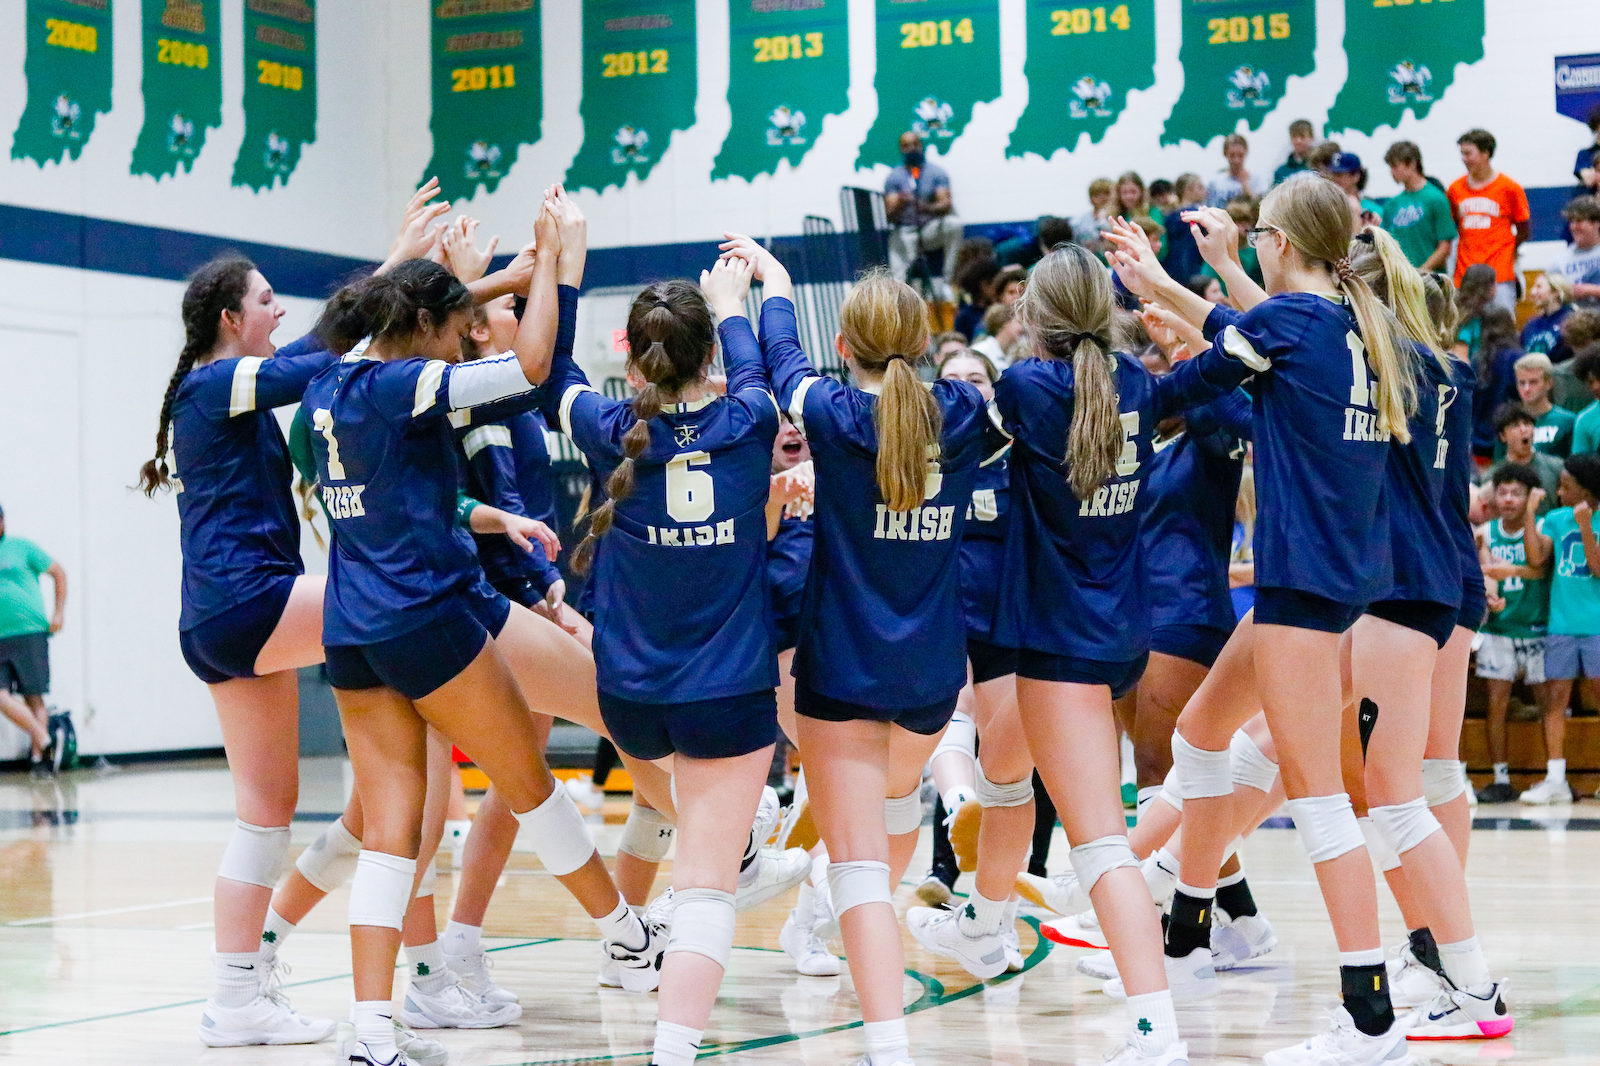 Volleyball Girls 2022 gallery cover photo